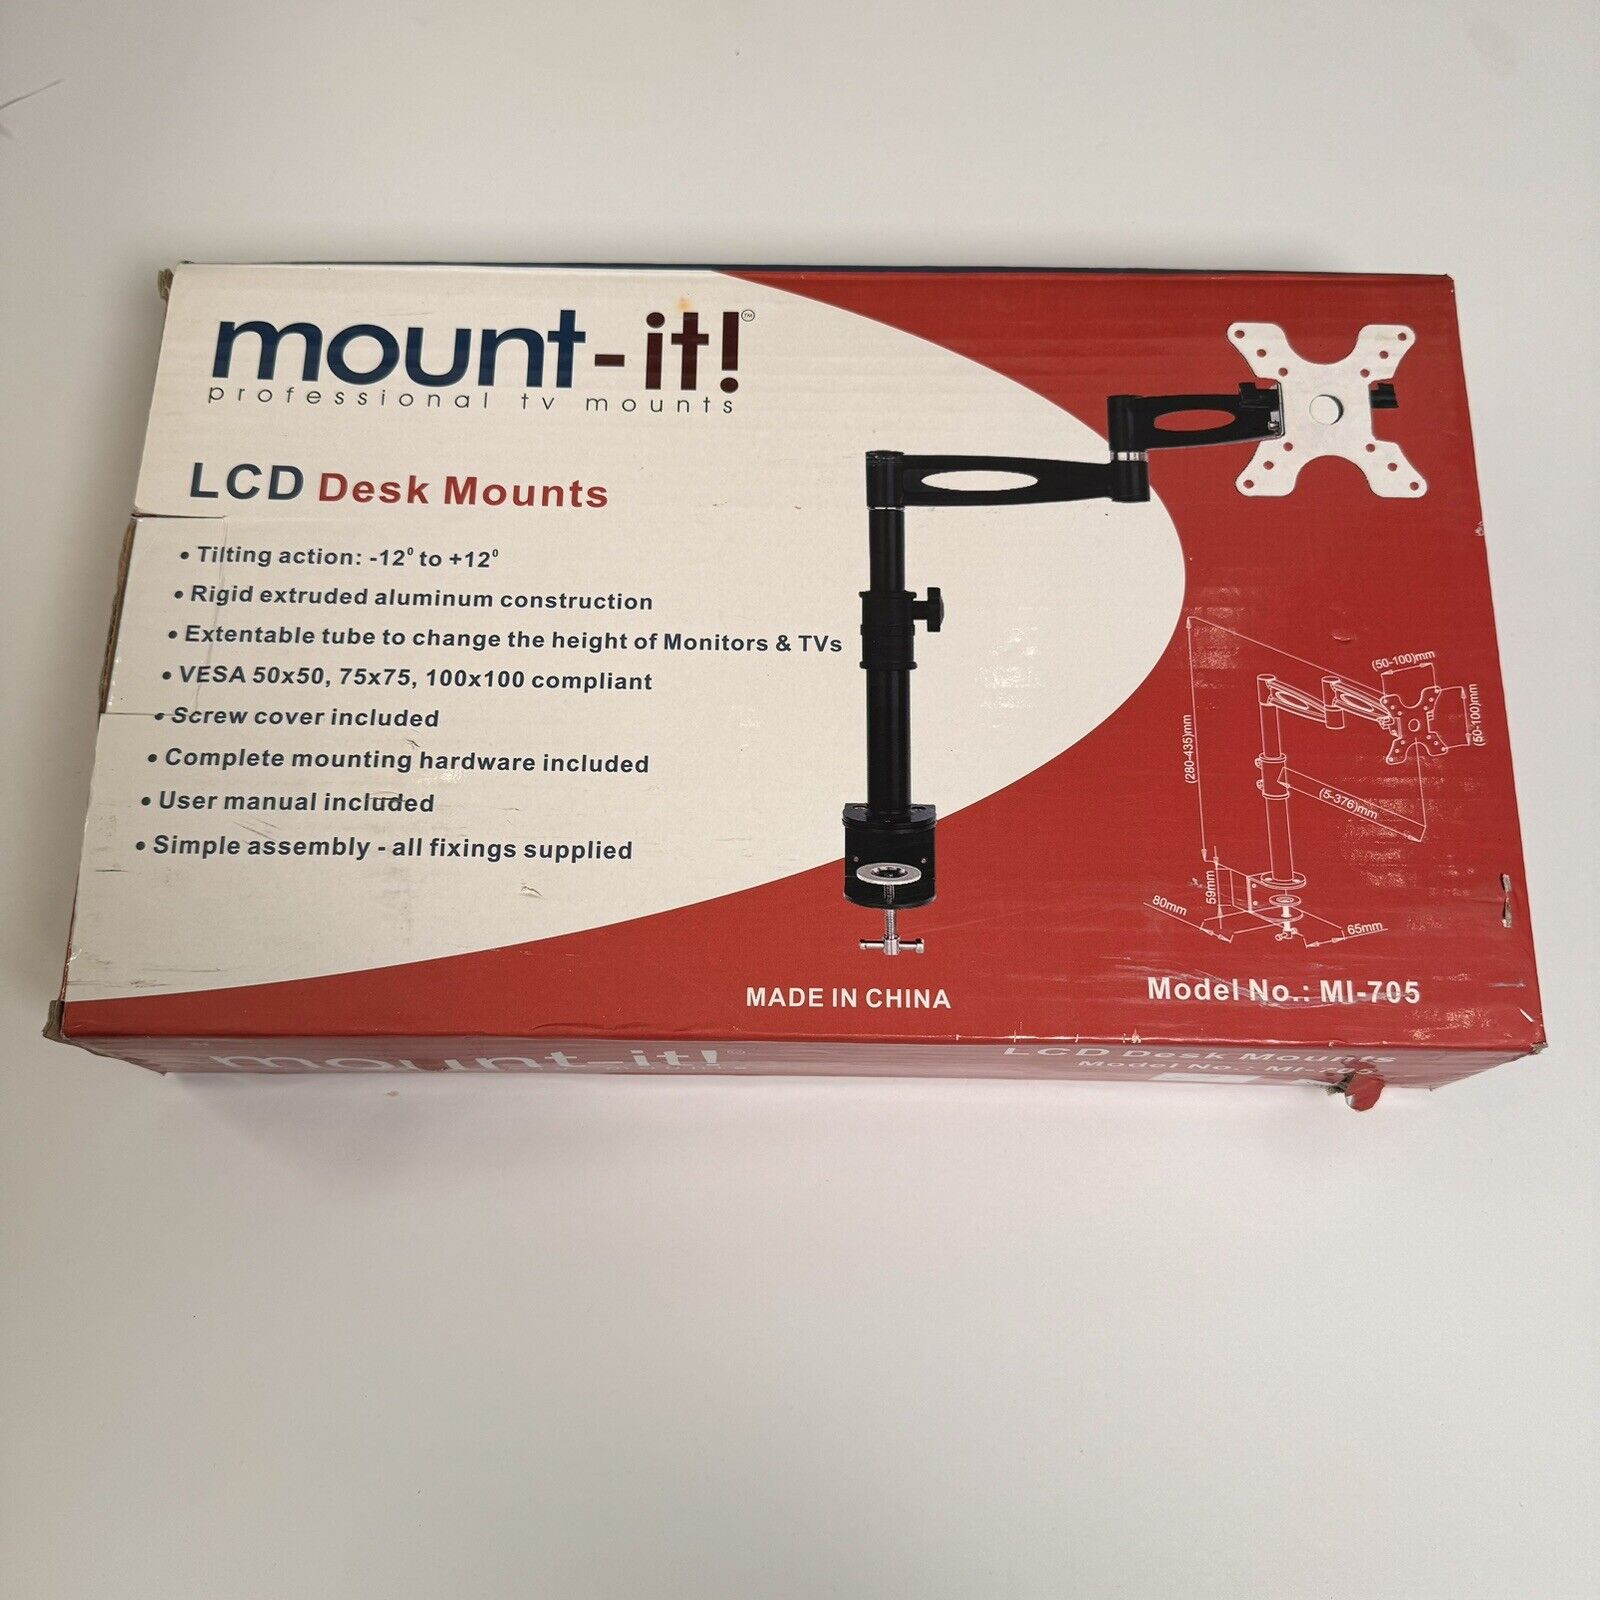 NEW Mount-It Desk Mount - Adjustable LCD Monitor Arm Up to 30